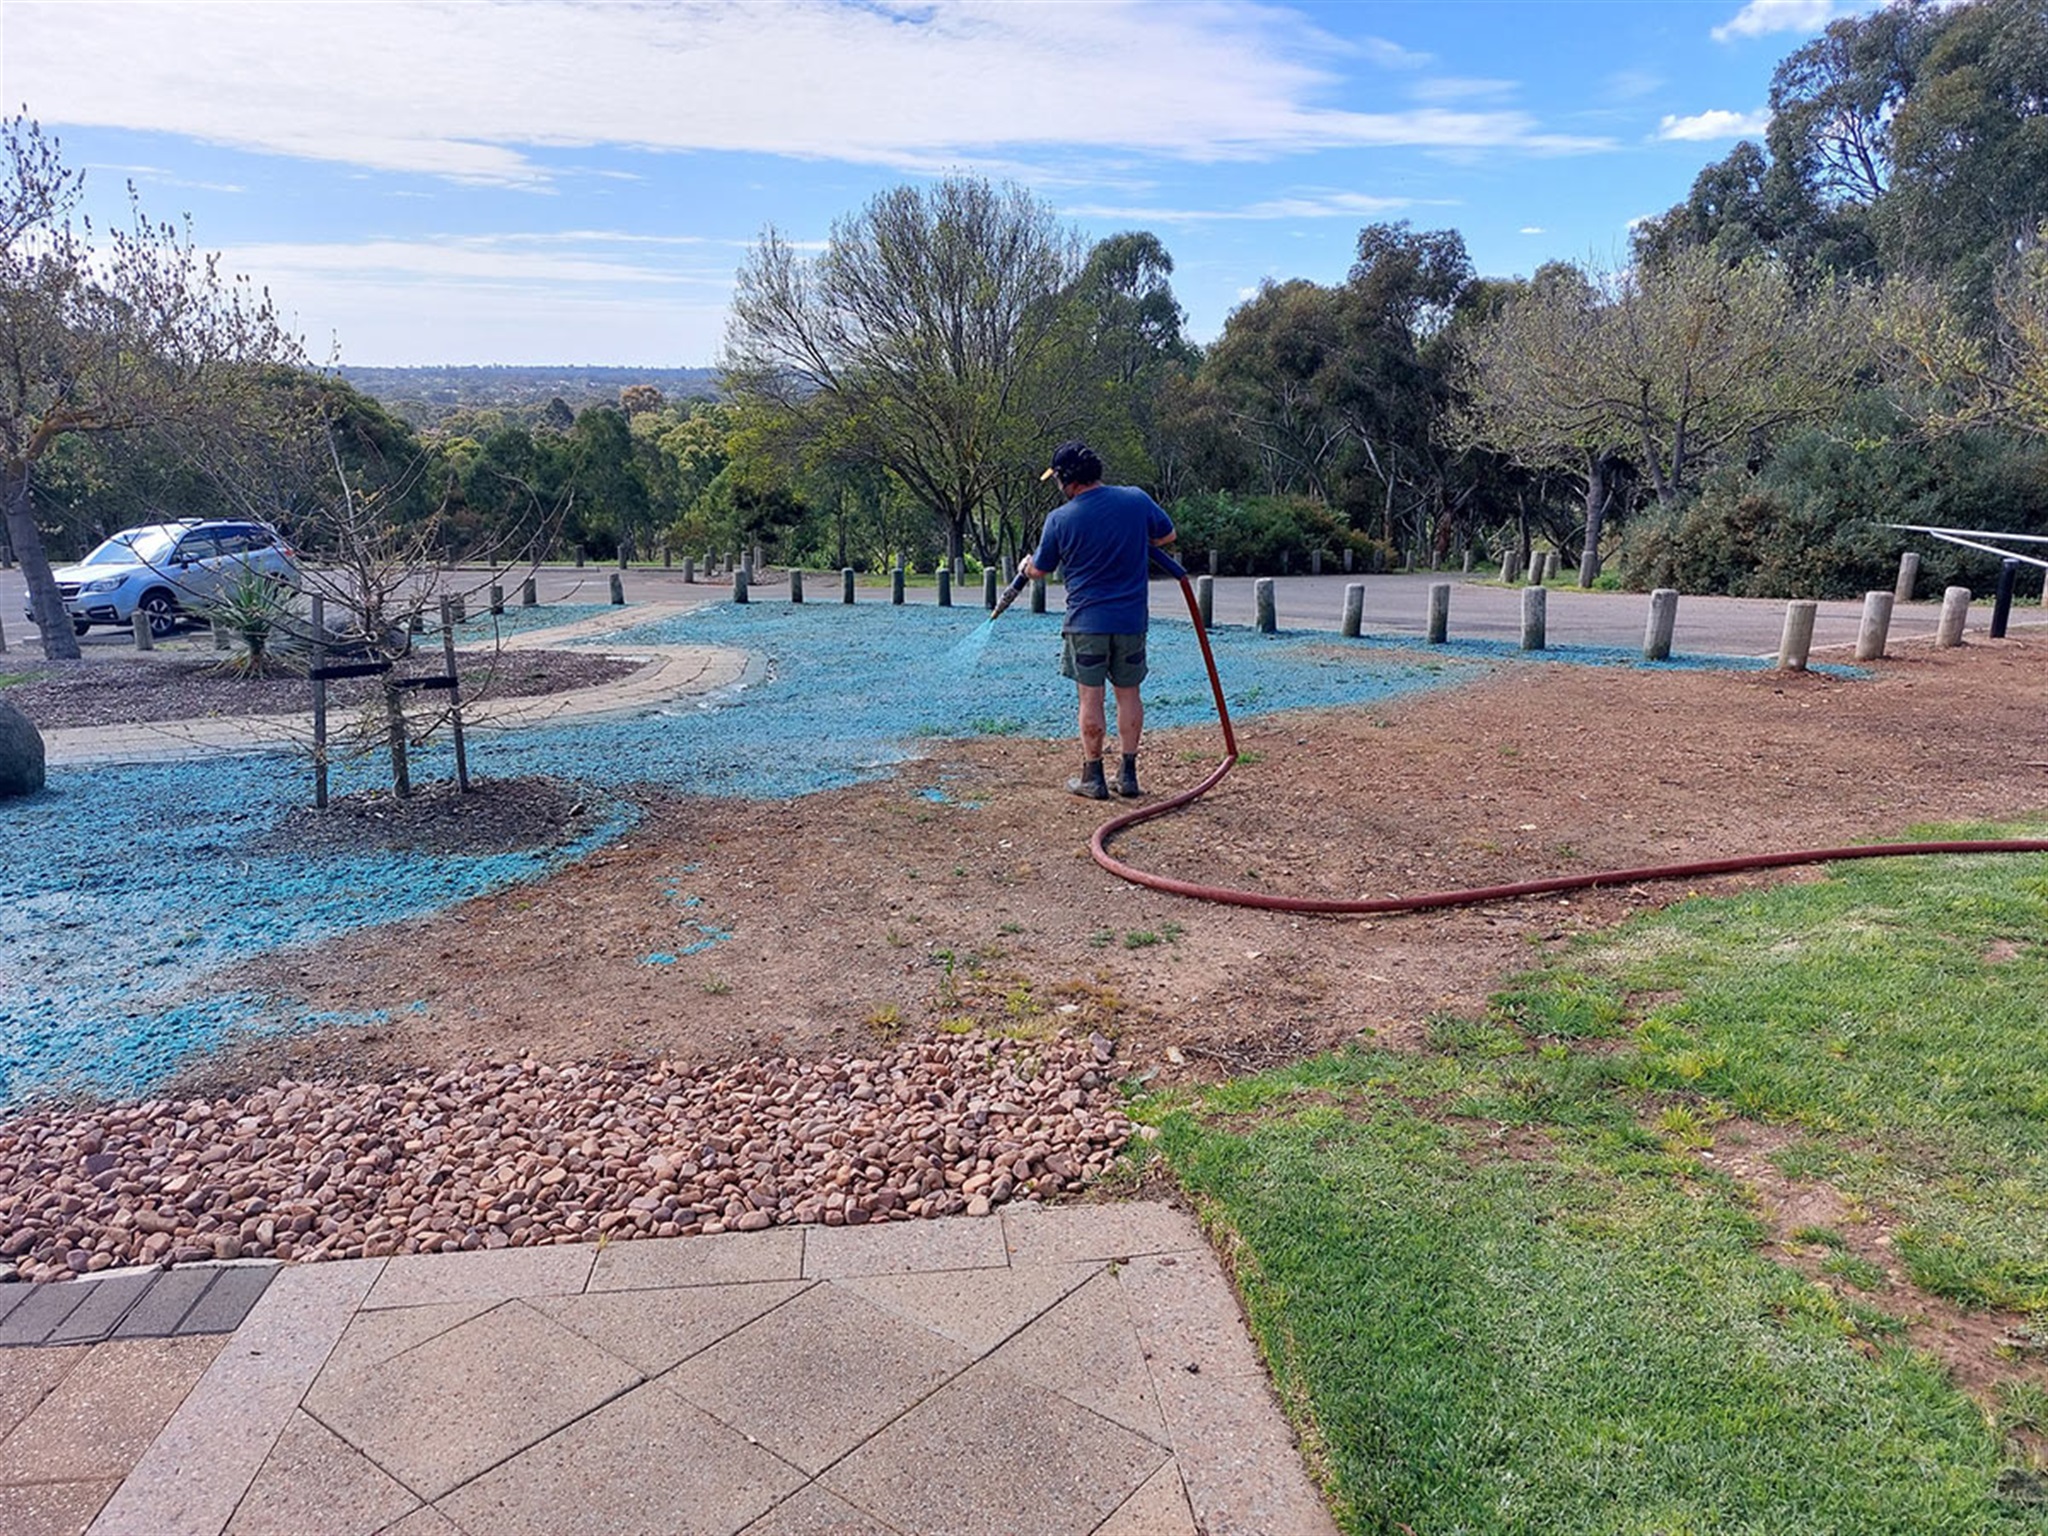 Blue liquid mulch being sprayed along the soil at Thalassa Park to 'hydroseed' the wildflower meadow.